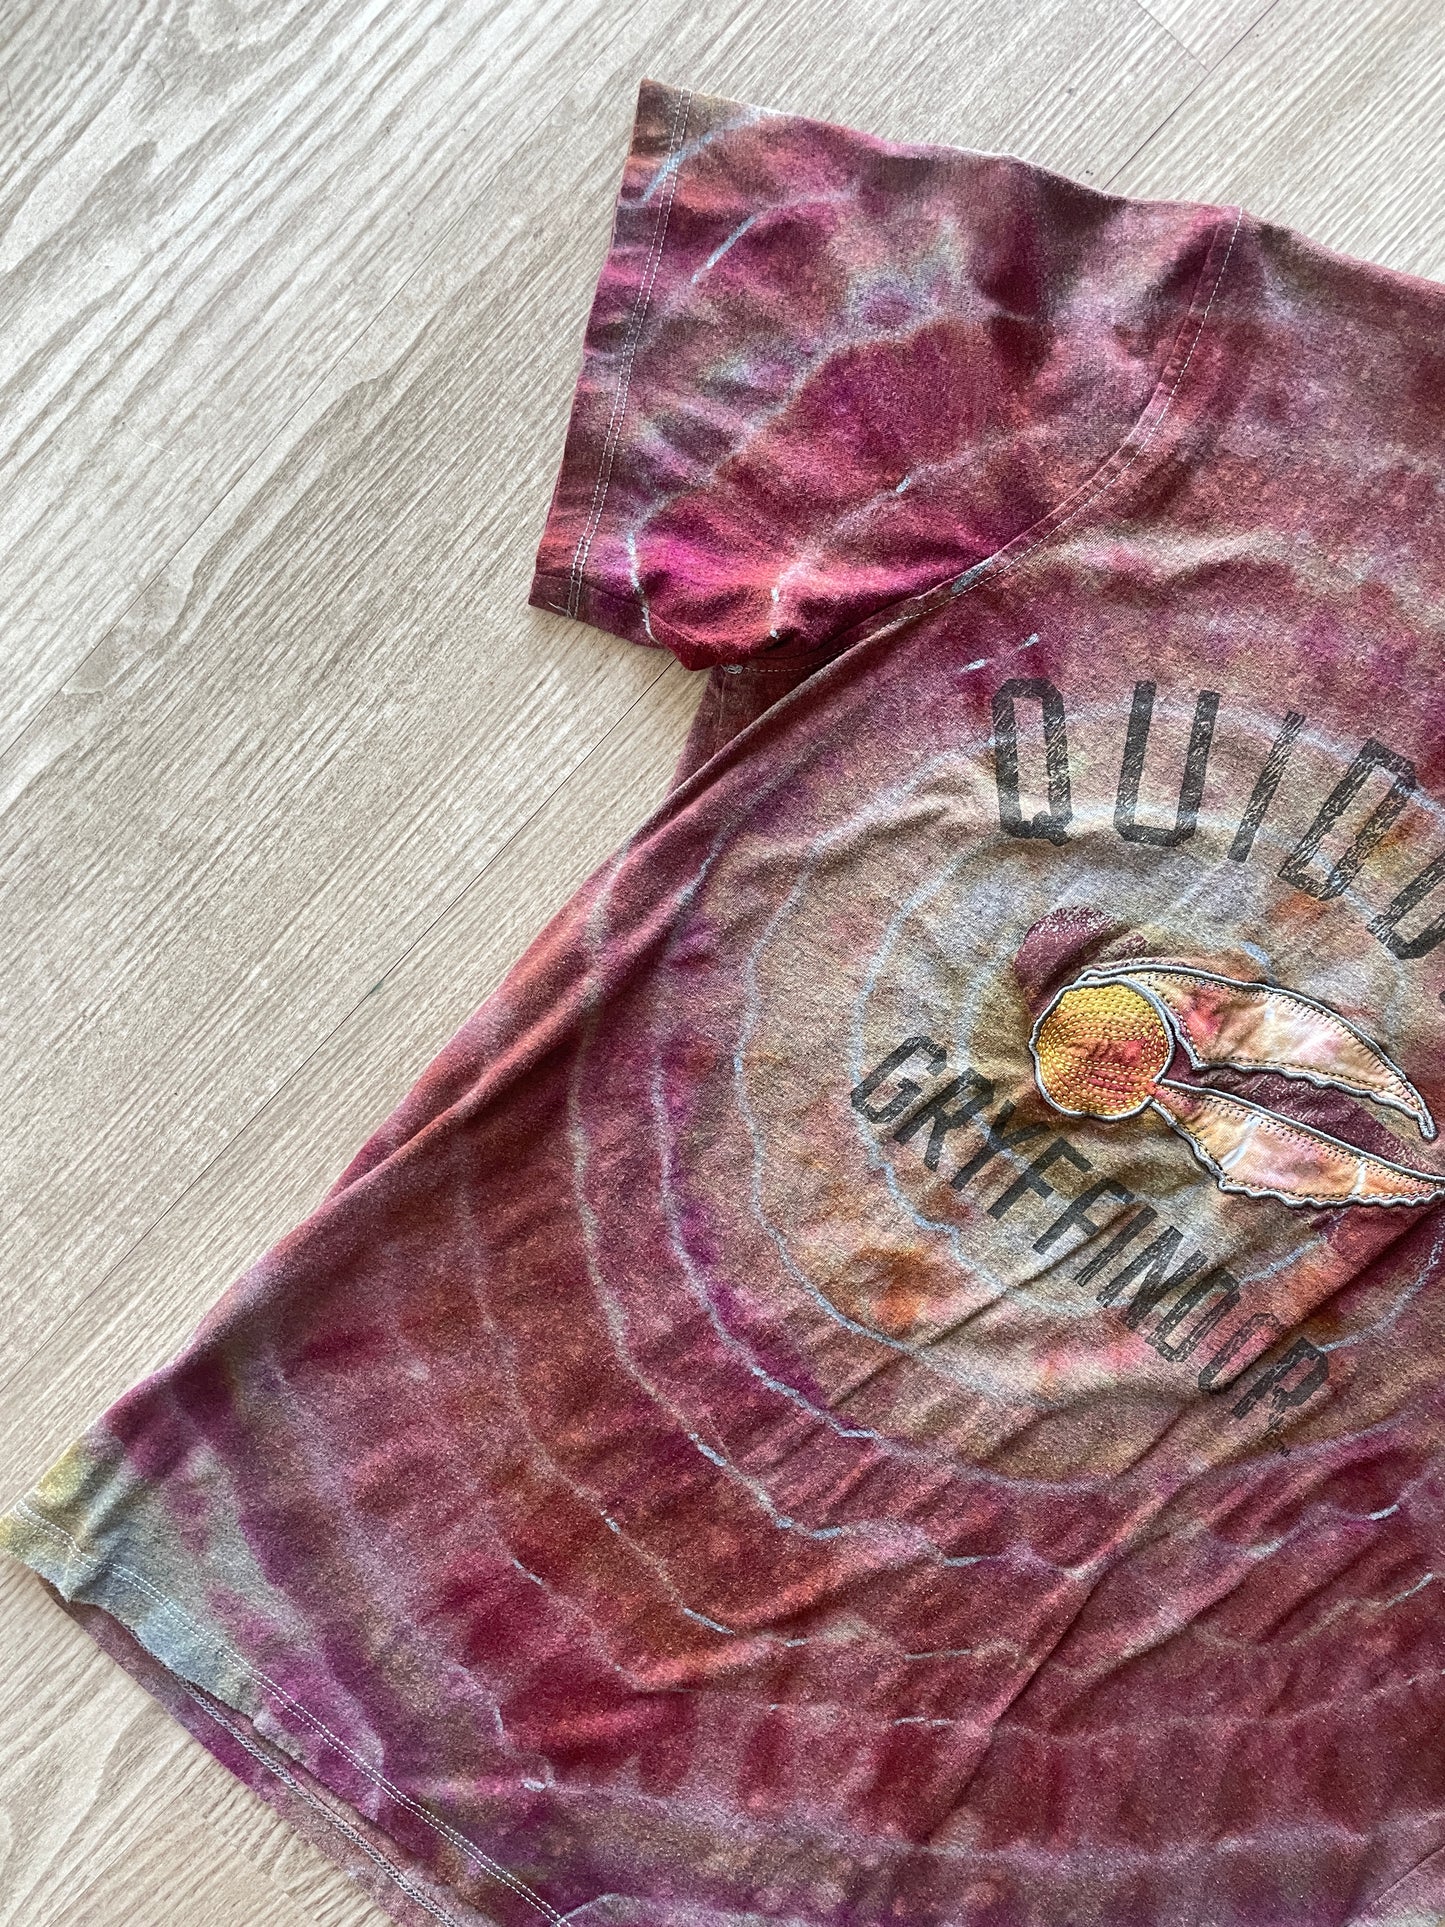 MEDIUM Men’s Harry Potter Gryffindor Quidditch Handmade Tie Dye Short Sleeve T-Shirt | One-Of-a-Kind Upcycled Red and Yellow Geode Top